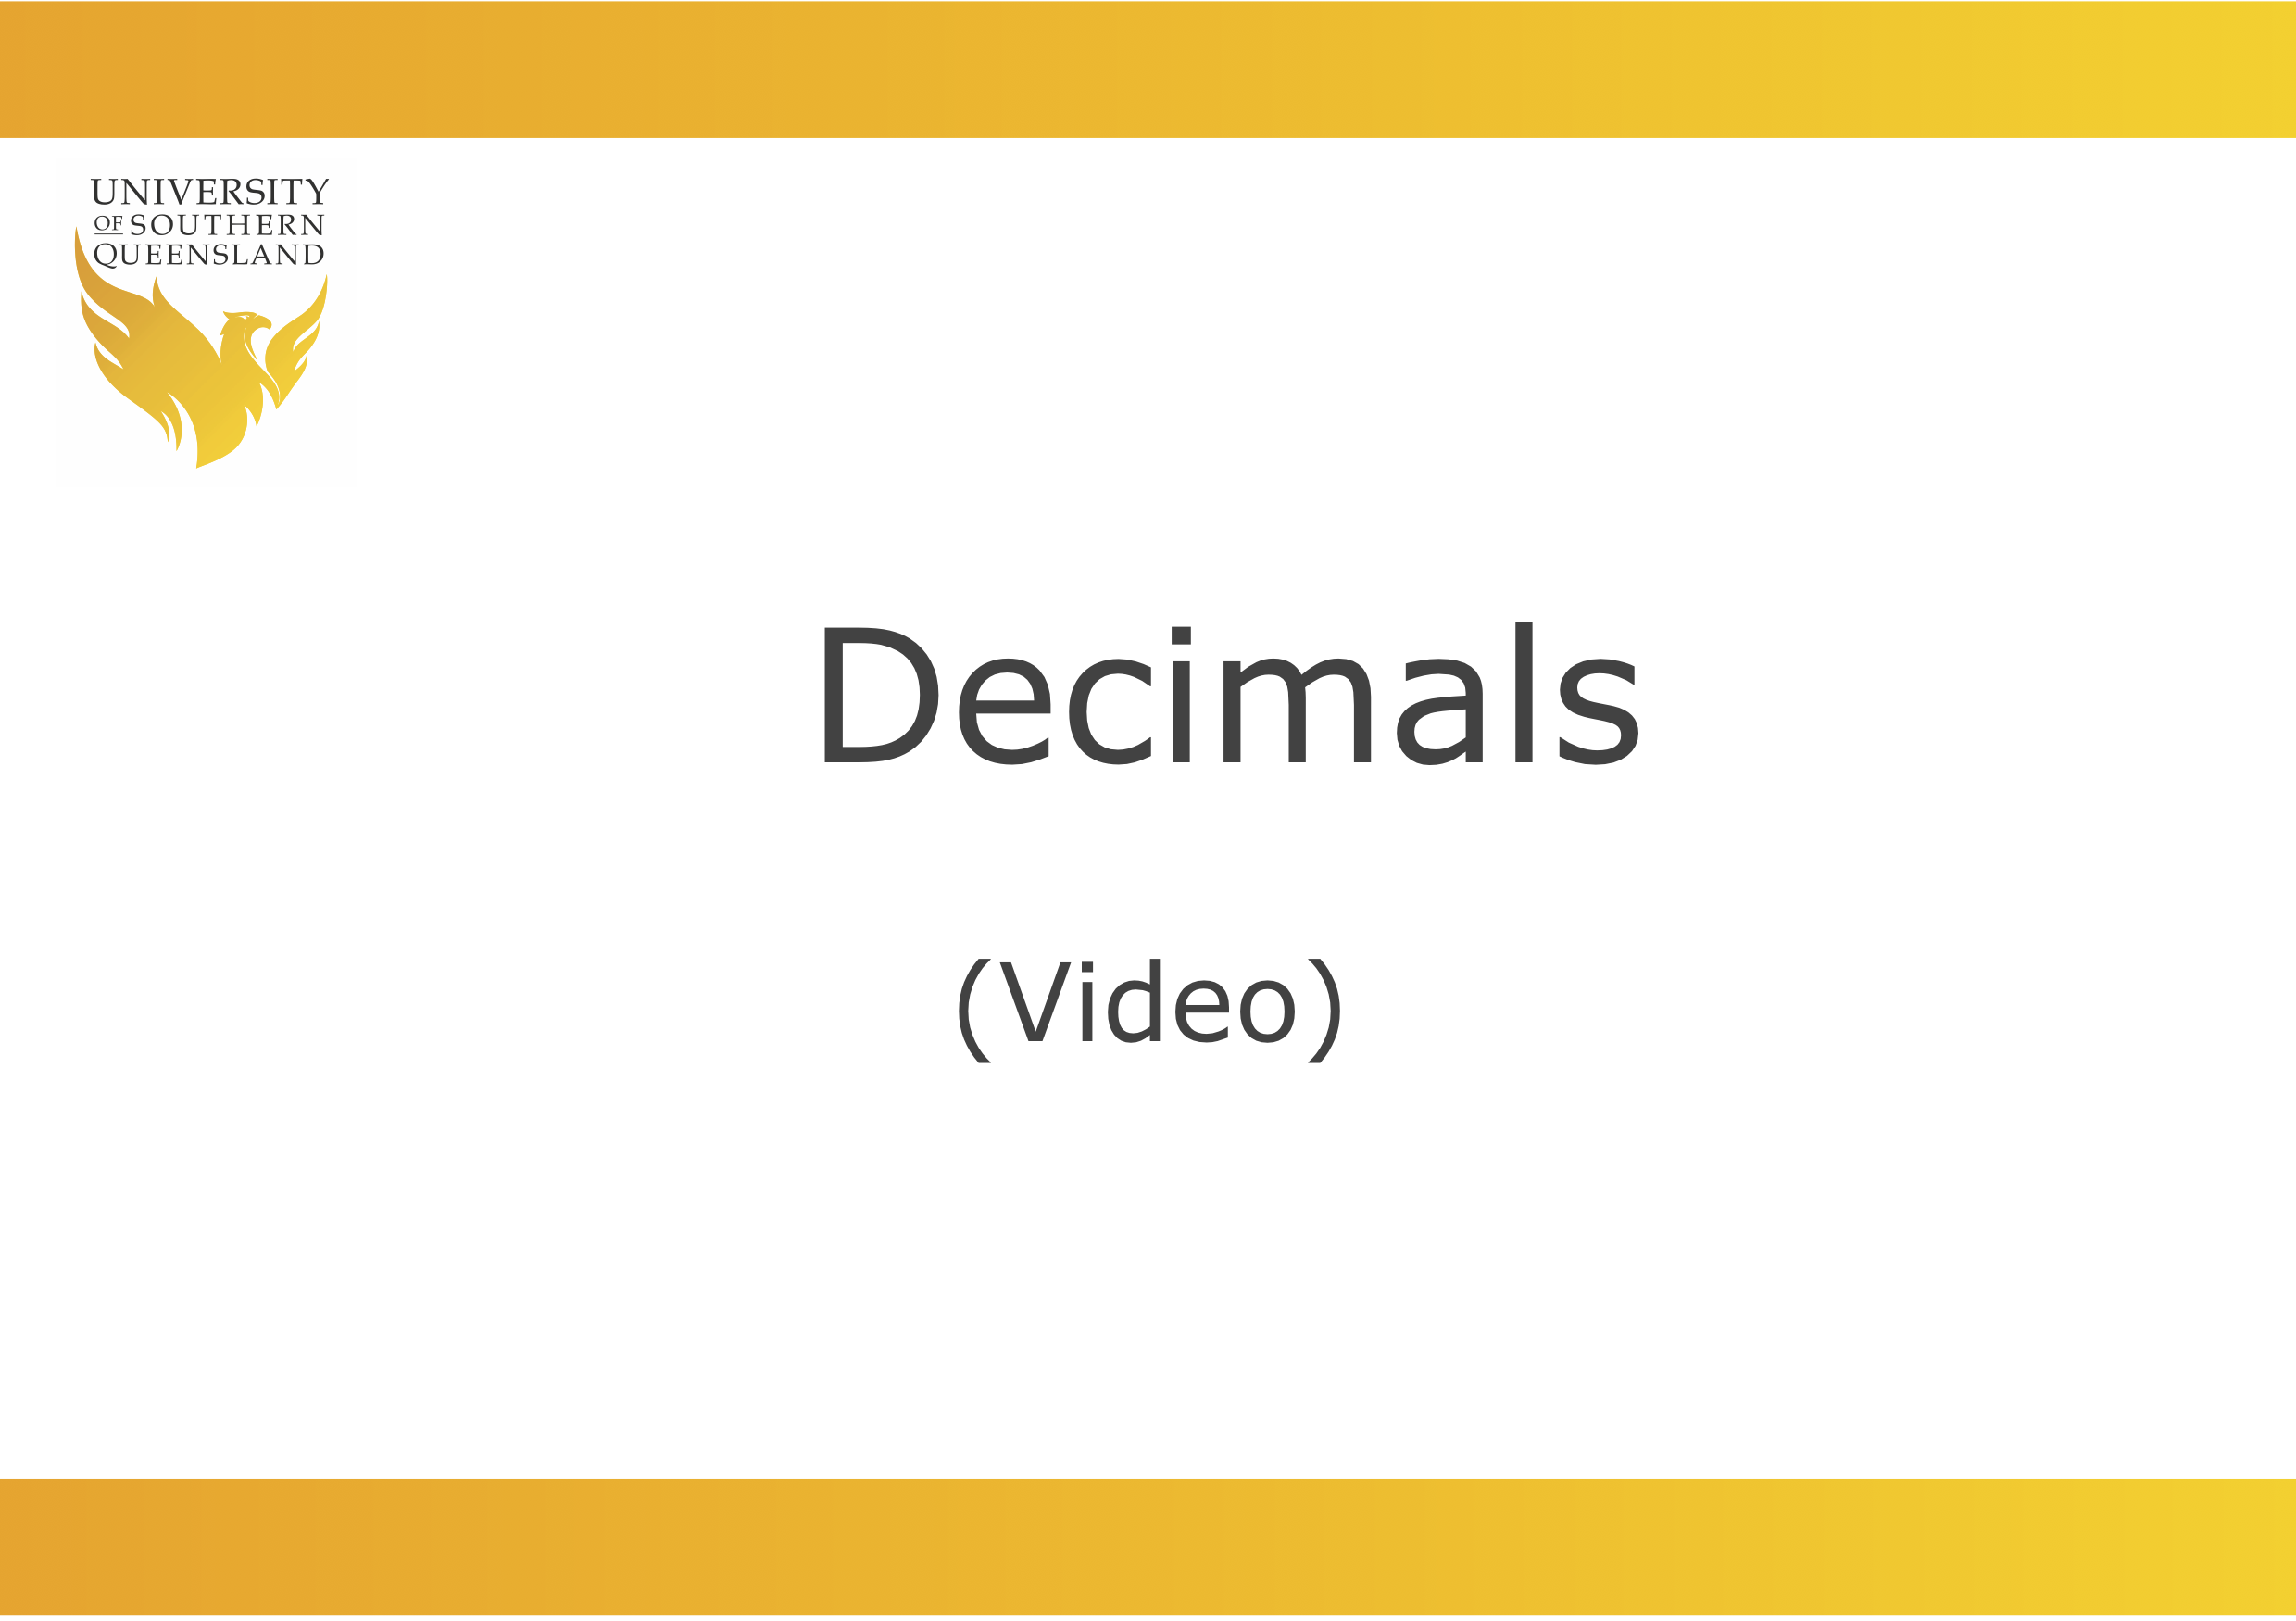 Image to click on for a video about decimals (fractions in other forms)